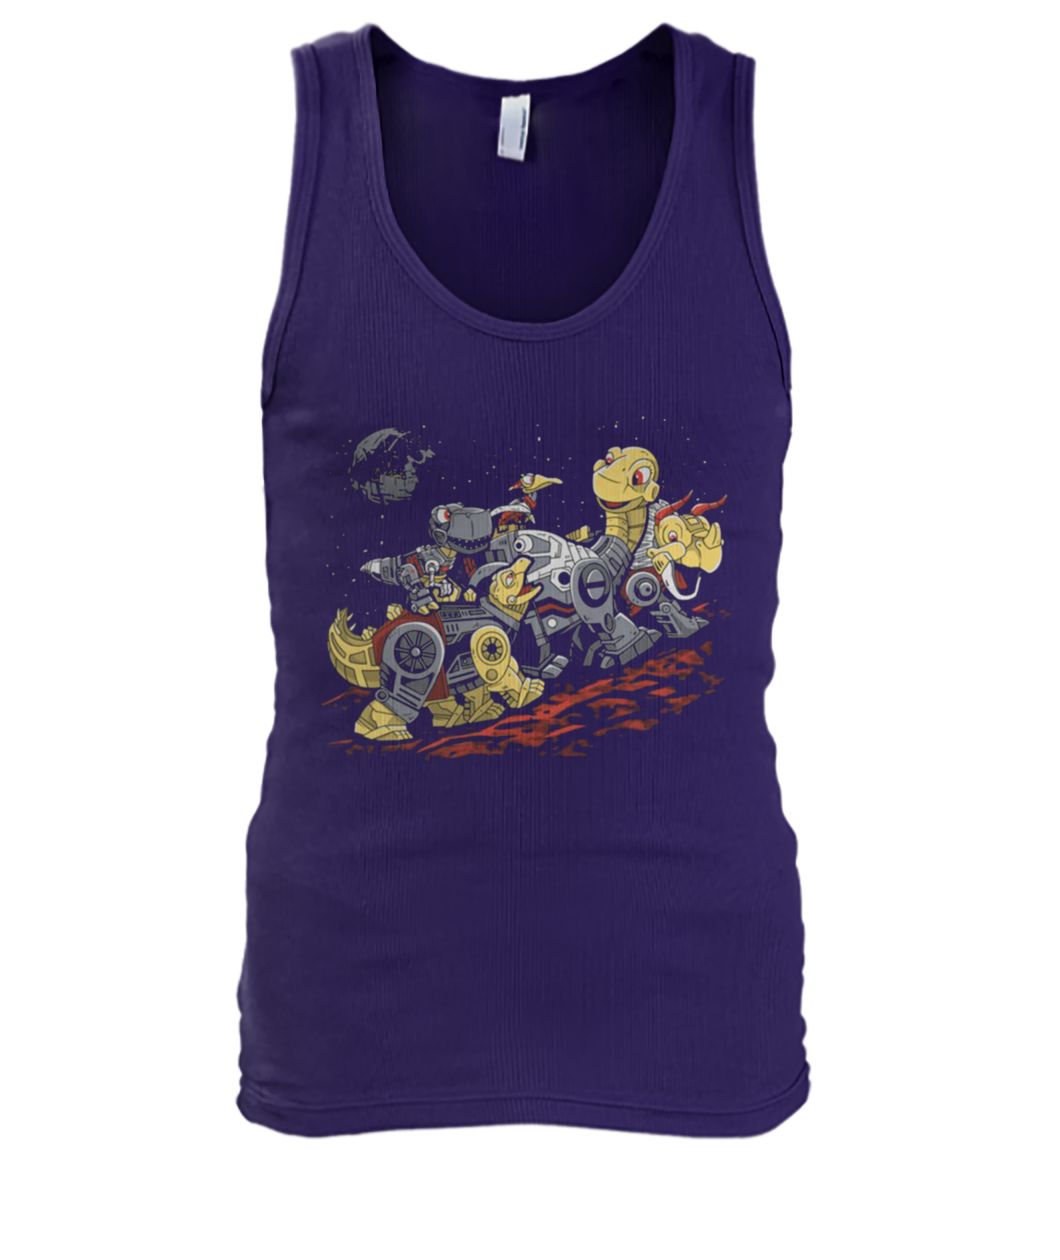 Bots before time transformers and the land before time men's tank top